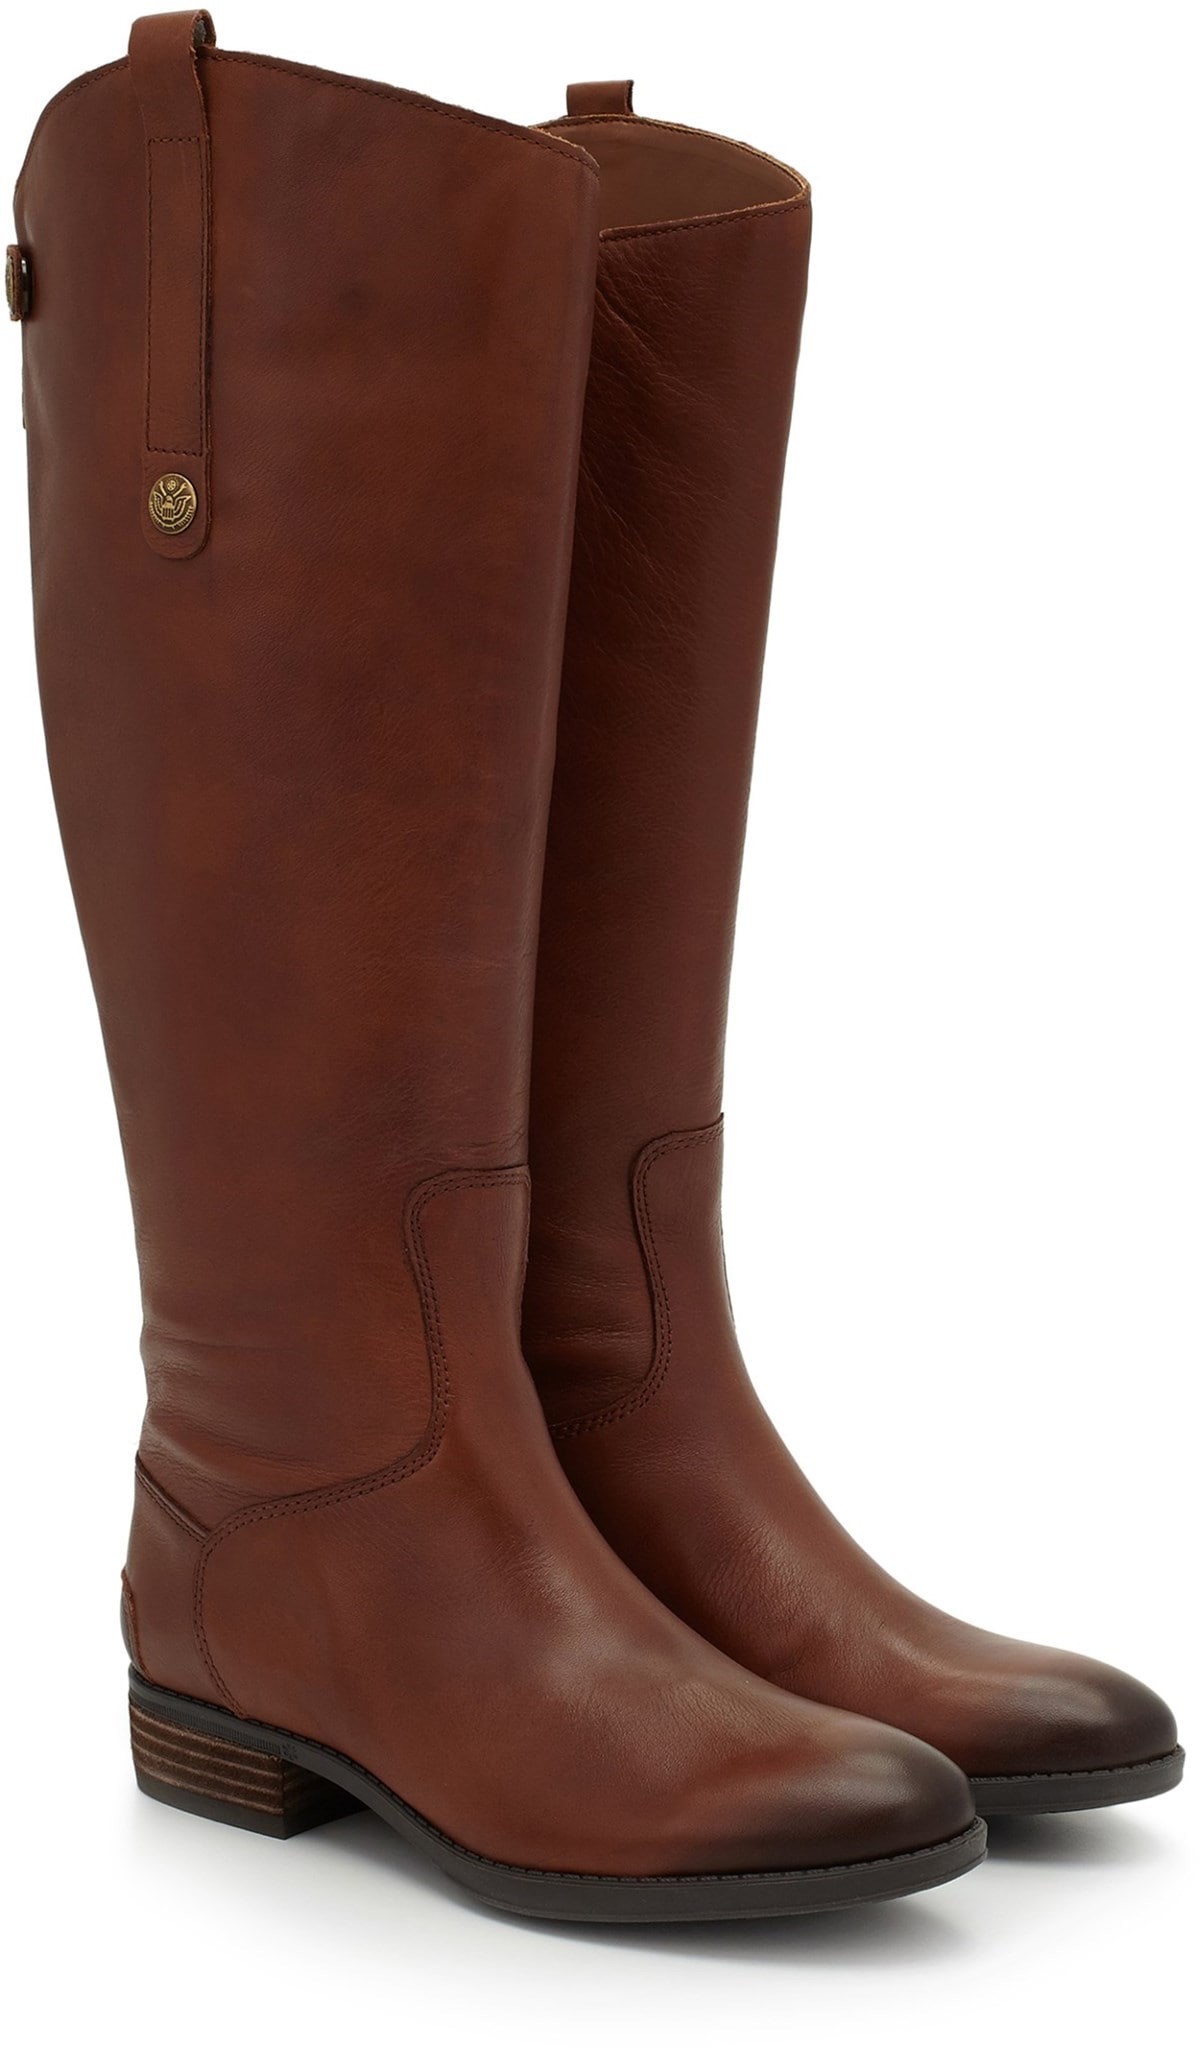 wide riding boots